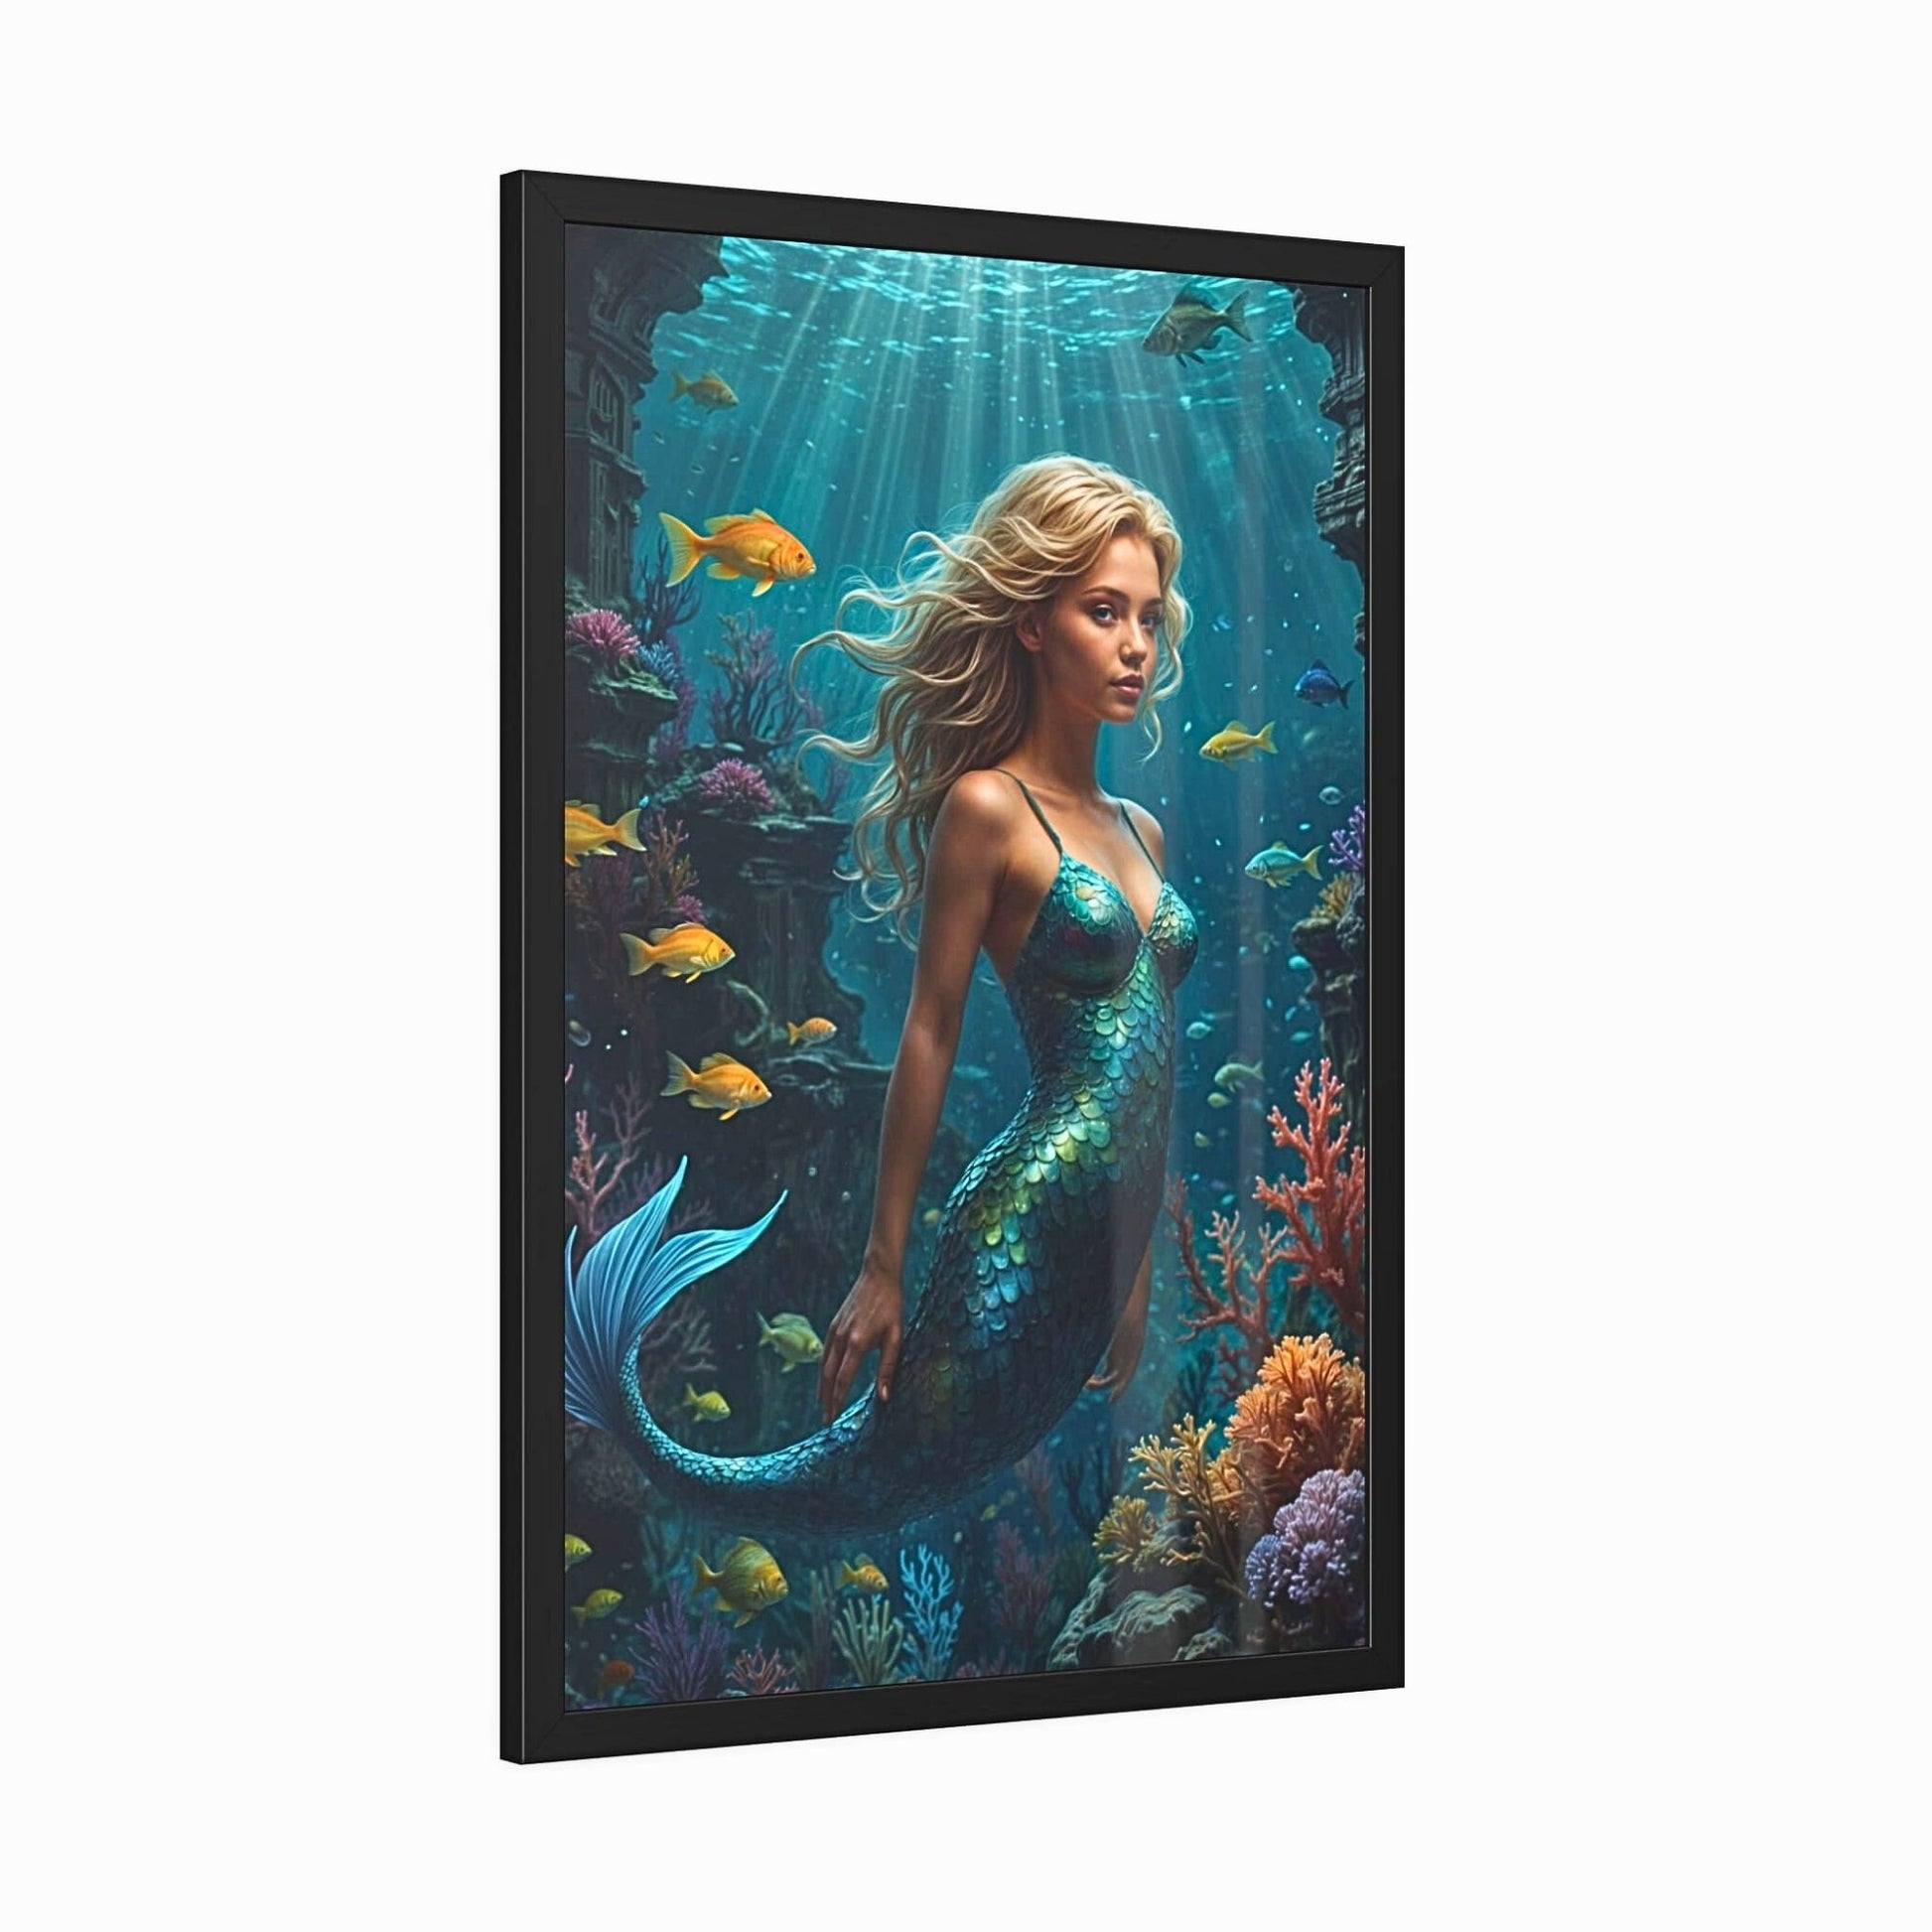 Delight your daughter with a magical Custom Mermaid Portrait from Photo. Perfect for her Birthday, this Personalized Princess Mermaid Portrait makes for stunning Wall Art. These unique gifts are ideal for daughters, sisters, moms, and girlfriends. Turn treasured photos into Custom Mermaid Art portraits, creating lasting memories and enchanting keepsakes for any special occasion.